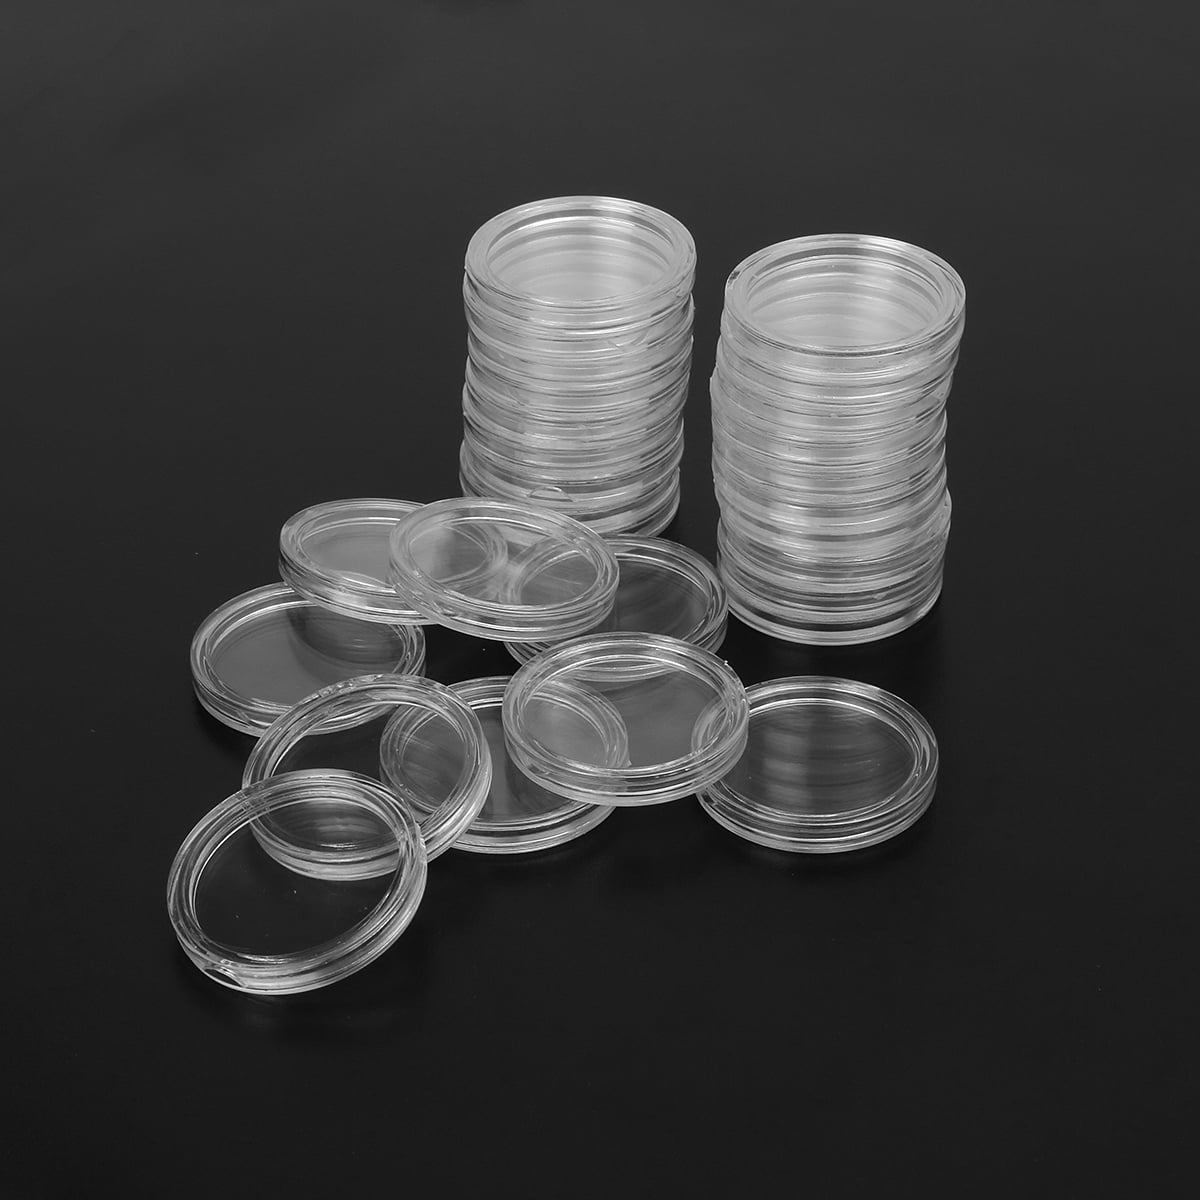 27mm Applied Clear Round Cases Coin Storage Protective Tube Holder Plastic Jw